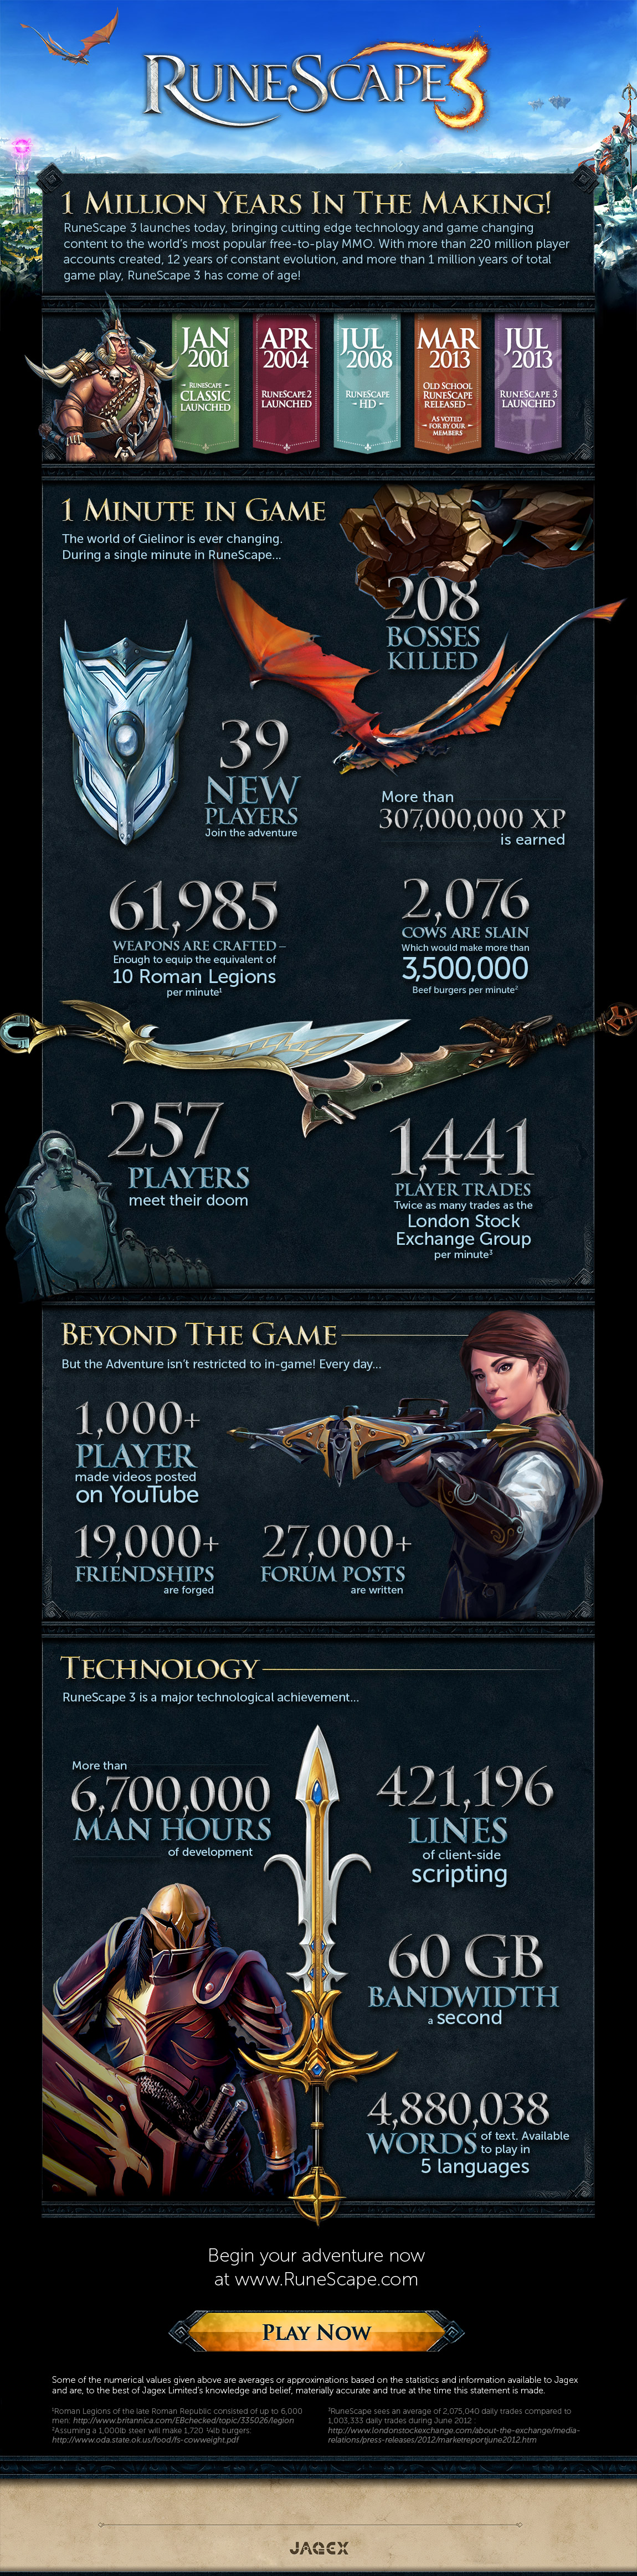 RuneScape Infographic: 1 million years of game play